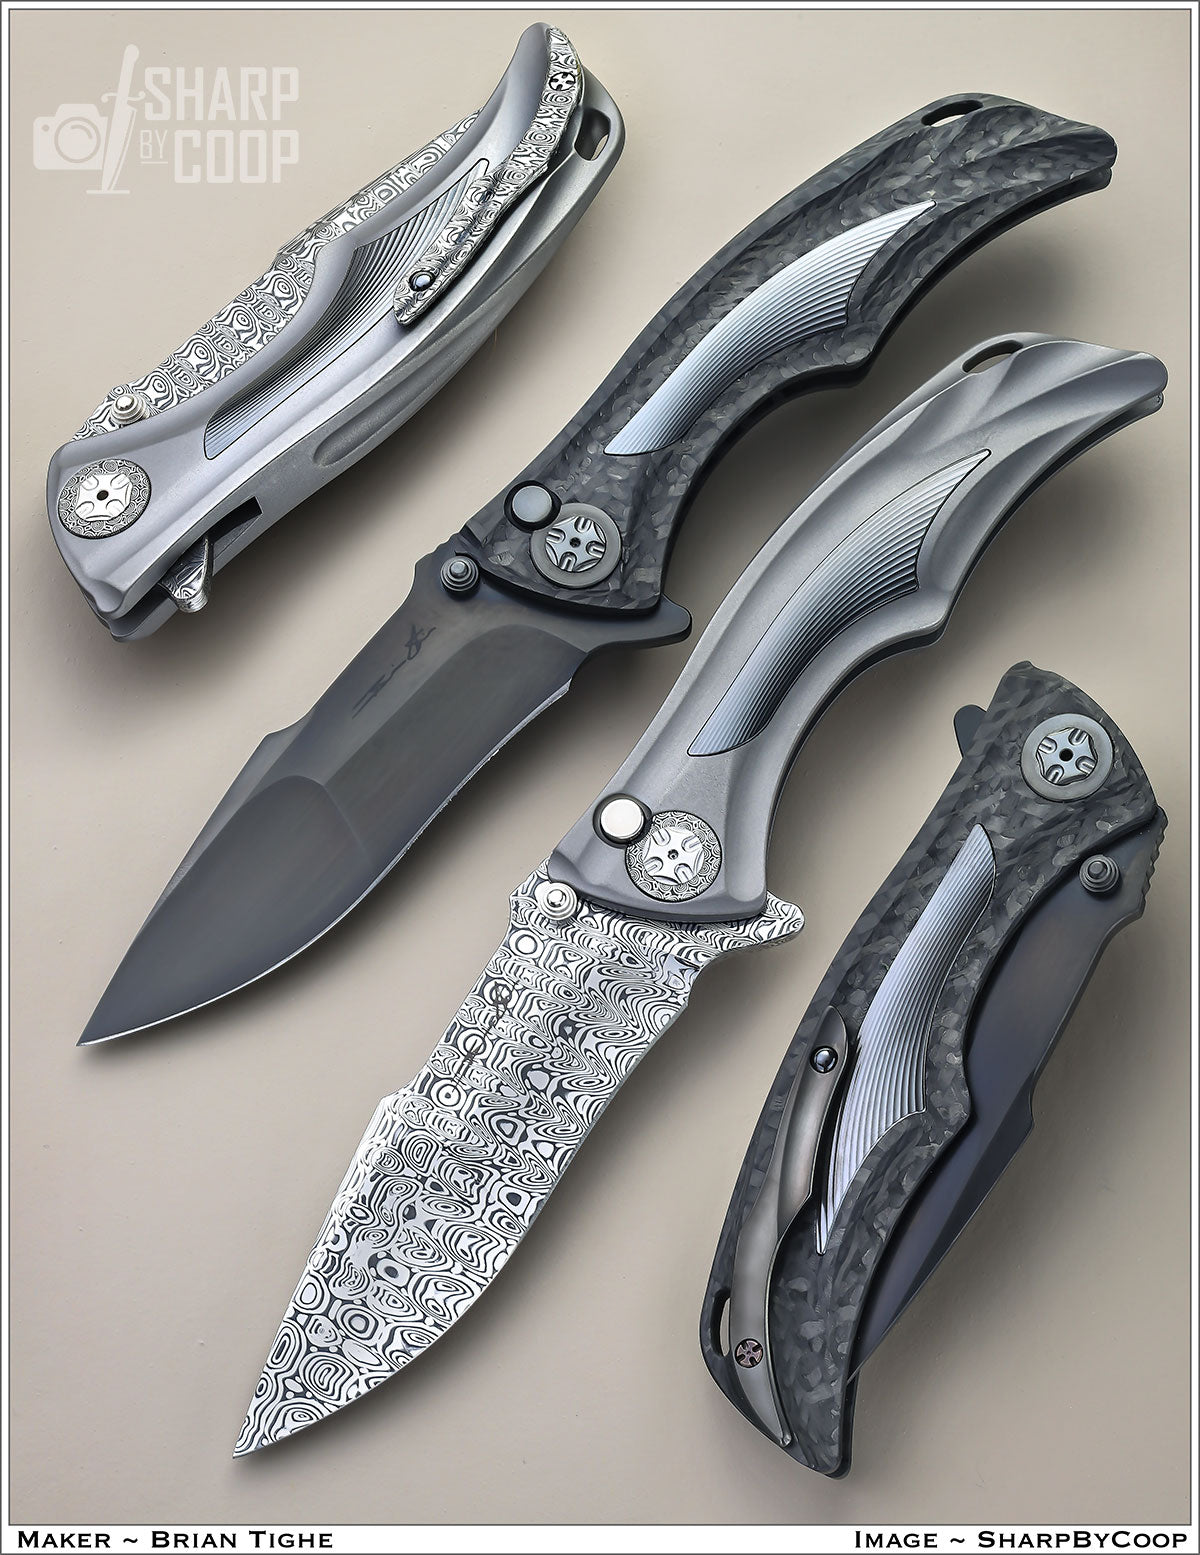 Tighe Down Titanium Integral With Damasteel and Carbon Fiber and Acid Washed RWL 34 Blade’s and Zirconium Inlays.